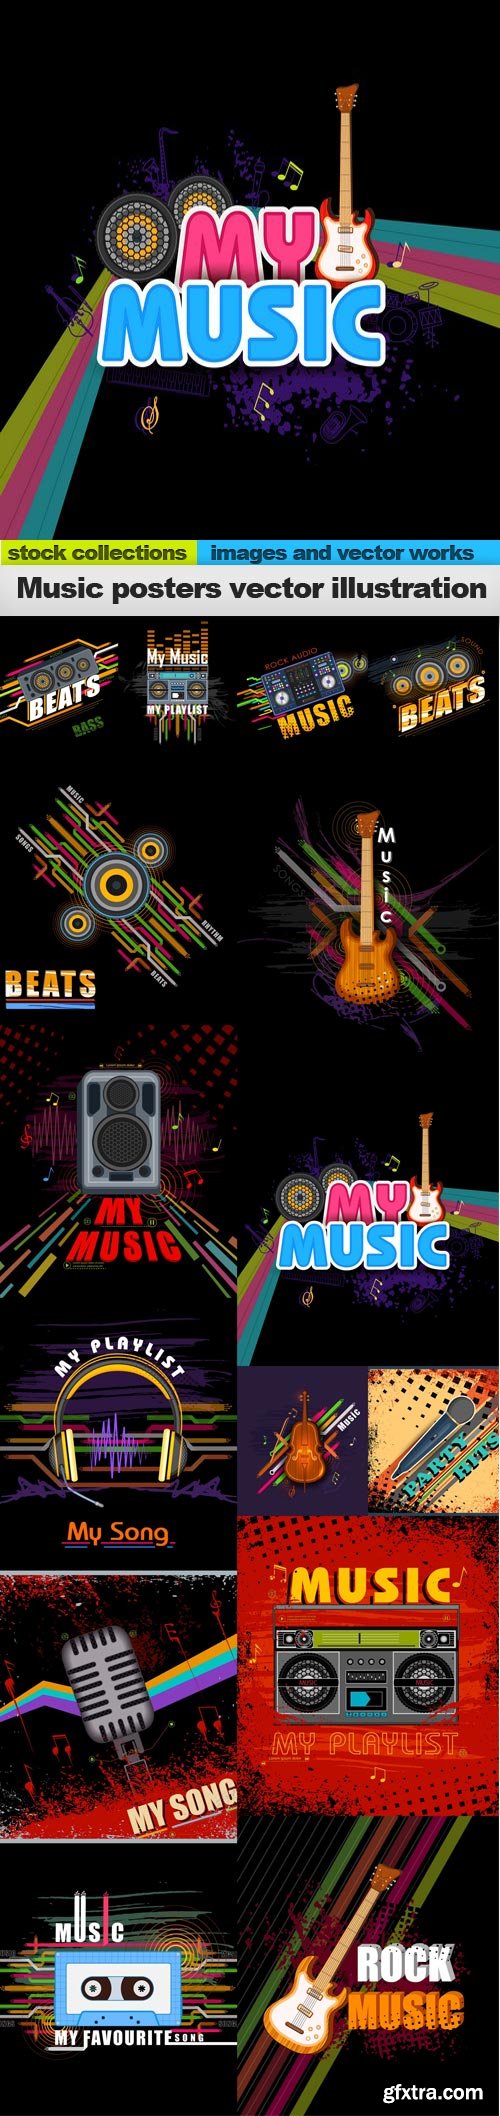 Music posters vector illustration, 15 x EPS